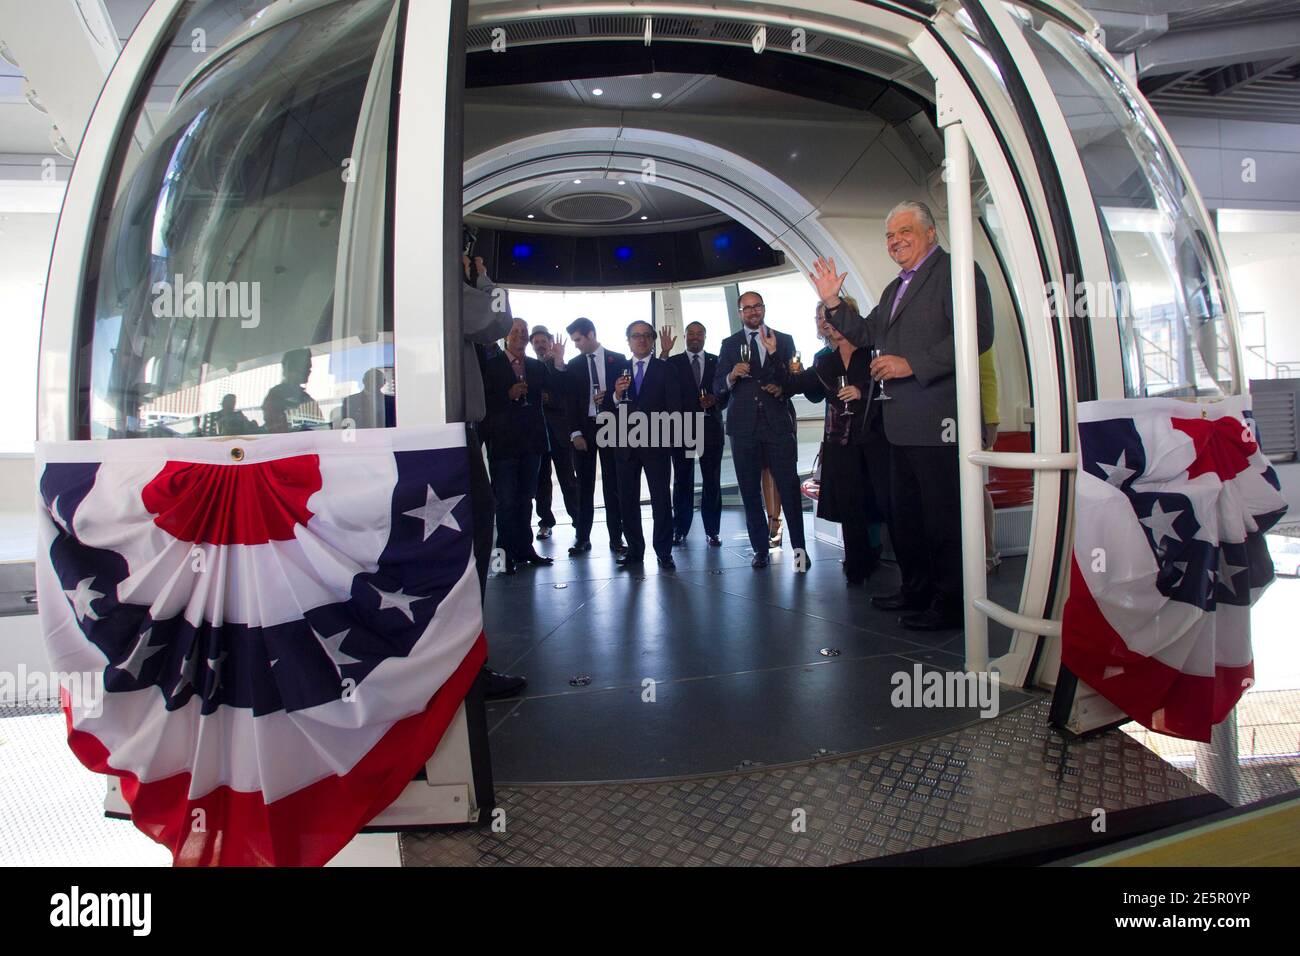 Special guests, executives and elected officials enter a cabin for the first official ride on the 550-foot-tall High Roller observation wheel in Las Vegas, Nevada March 31, 2014. Clark County Commission Chairman Steve Sisolak waves at right. The observation wheel, the tallest in the world, is part of the Linq project, a $550 million development by Caesars Entertainment Corp. The ride opened to the public on Monday. REUTERS/Las Vegas Sun/Steve Marcus (UNITED STATES - Tags: SOCIETY ENTERTAINMENT BUSINESS) Stock Photo